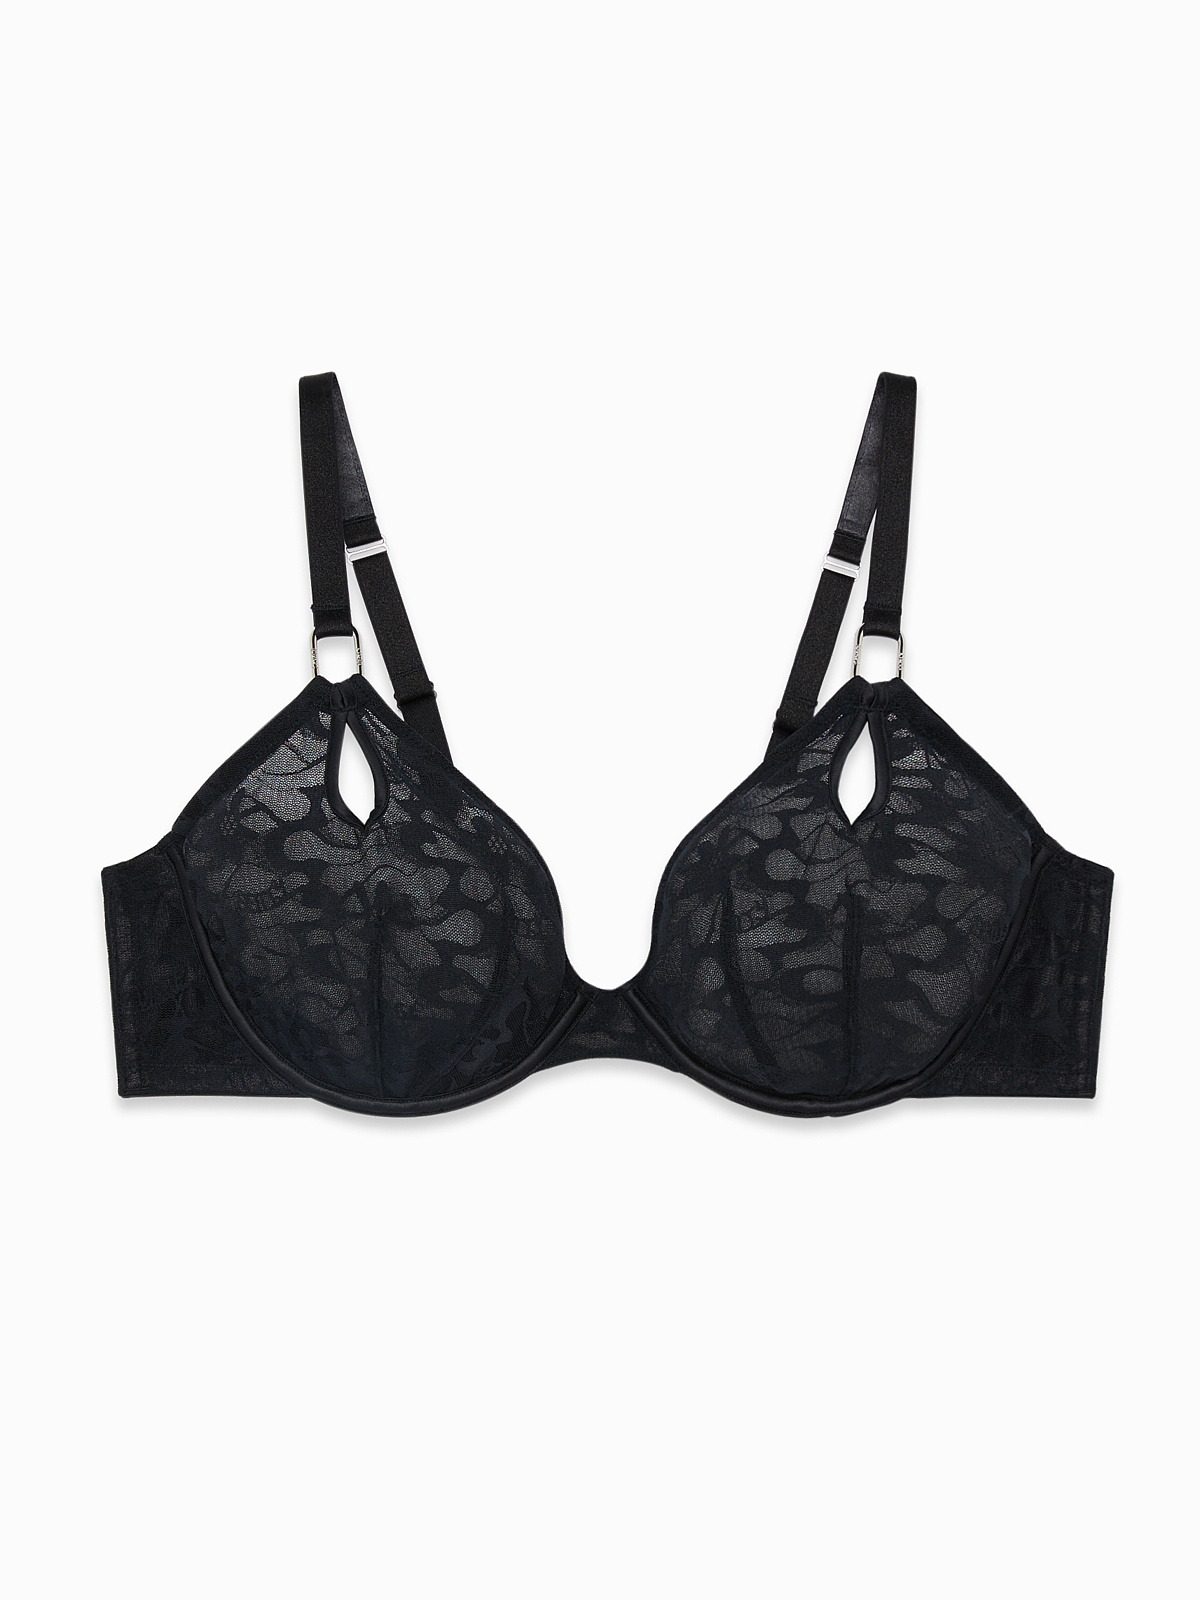 https://cdn.savagex.com/media/images/products/BA2355961-0687/LINK-UP-LACE-UNLINED-PLUNGE-BRA-BA2355961-0687-LAYDOWN-1200x1600.jpg